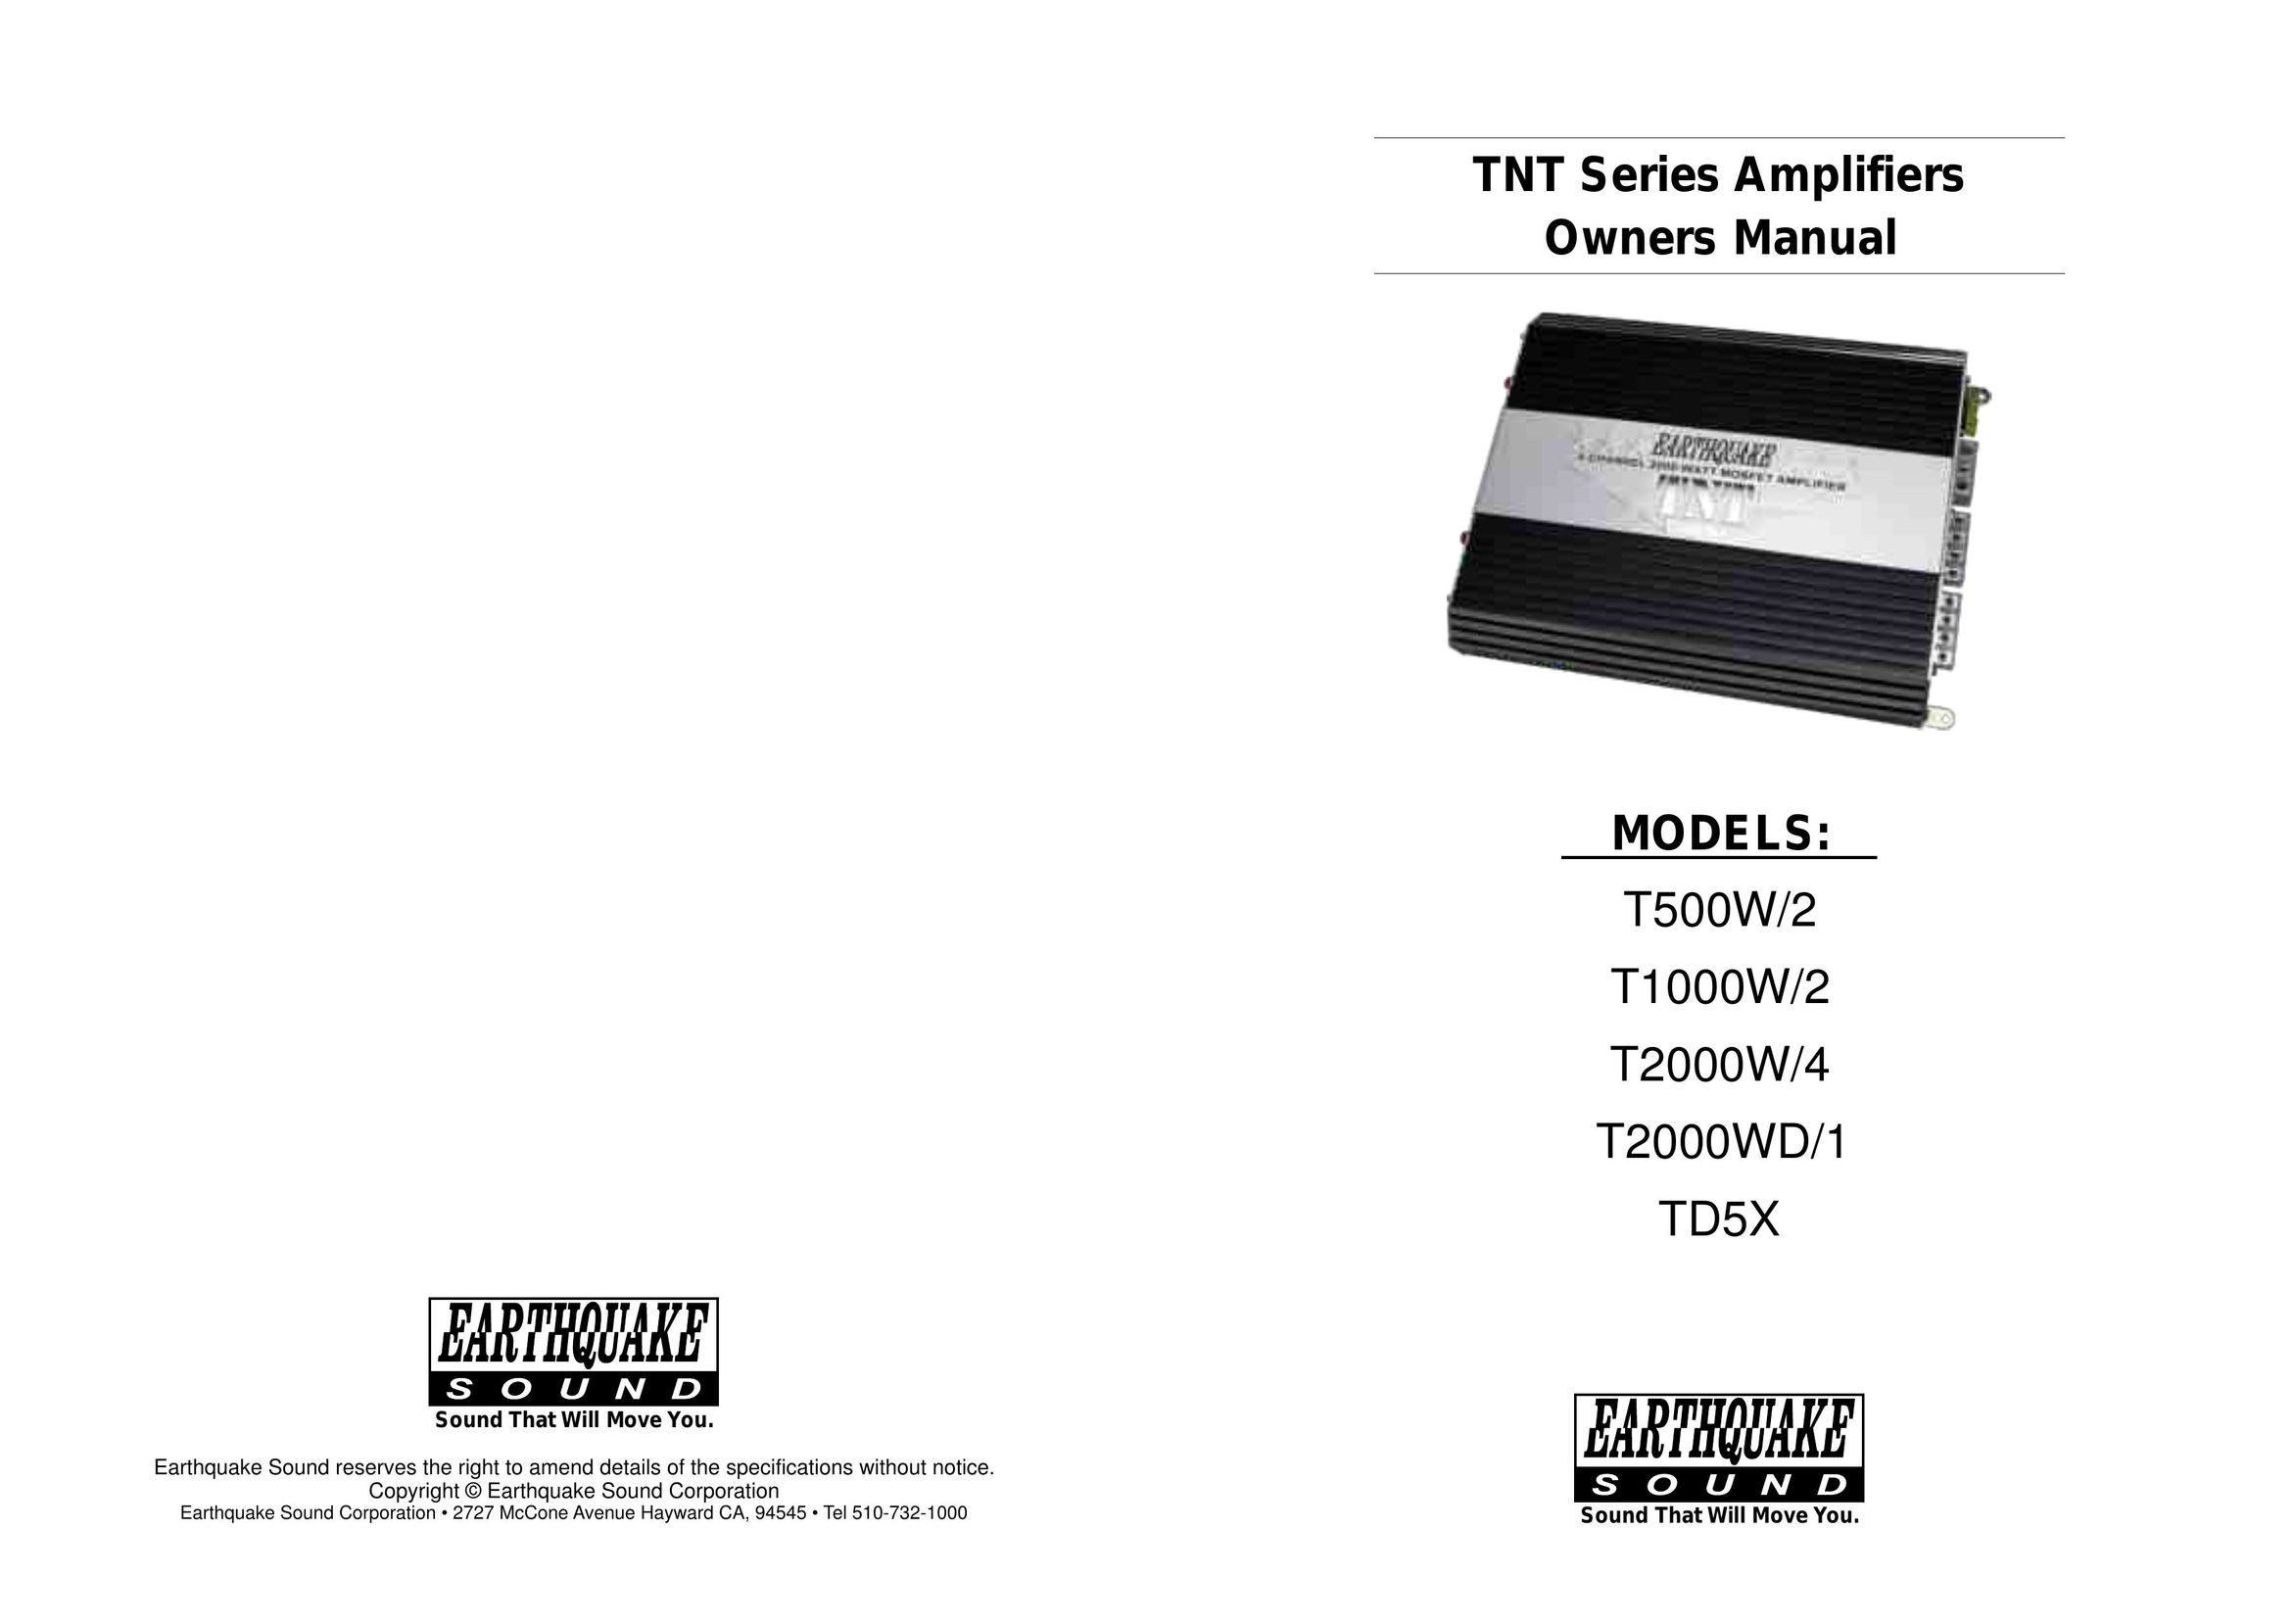 Earthquake Sound T2000WD/1 Car Amplifier User Manual